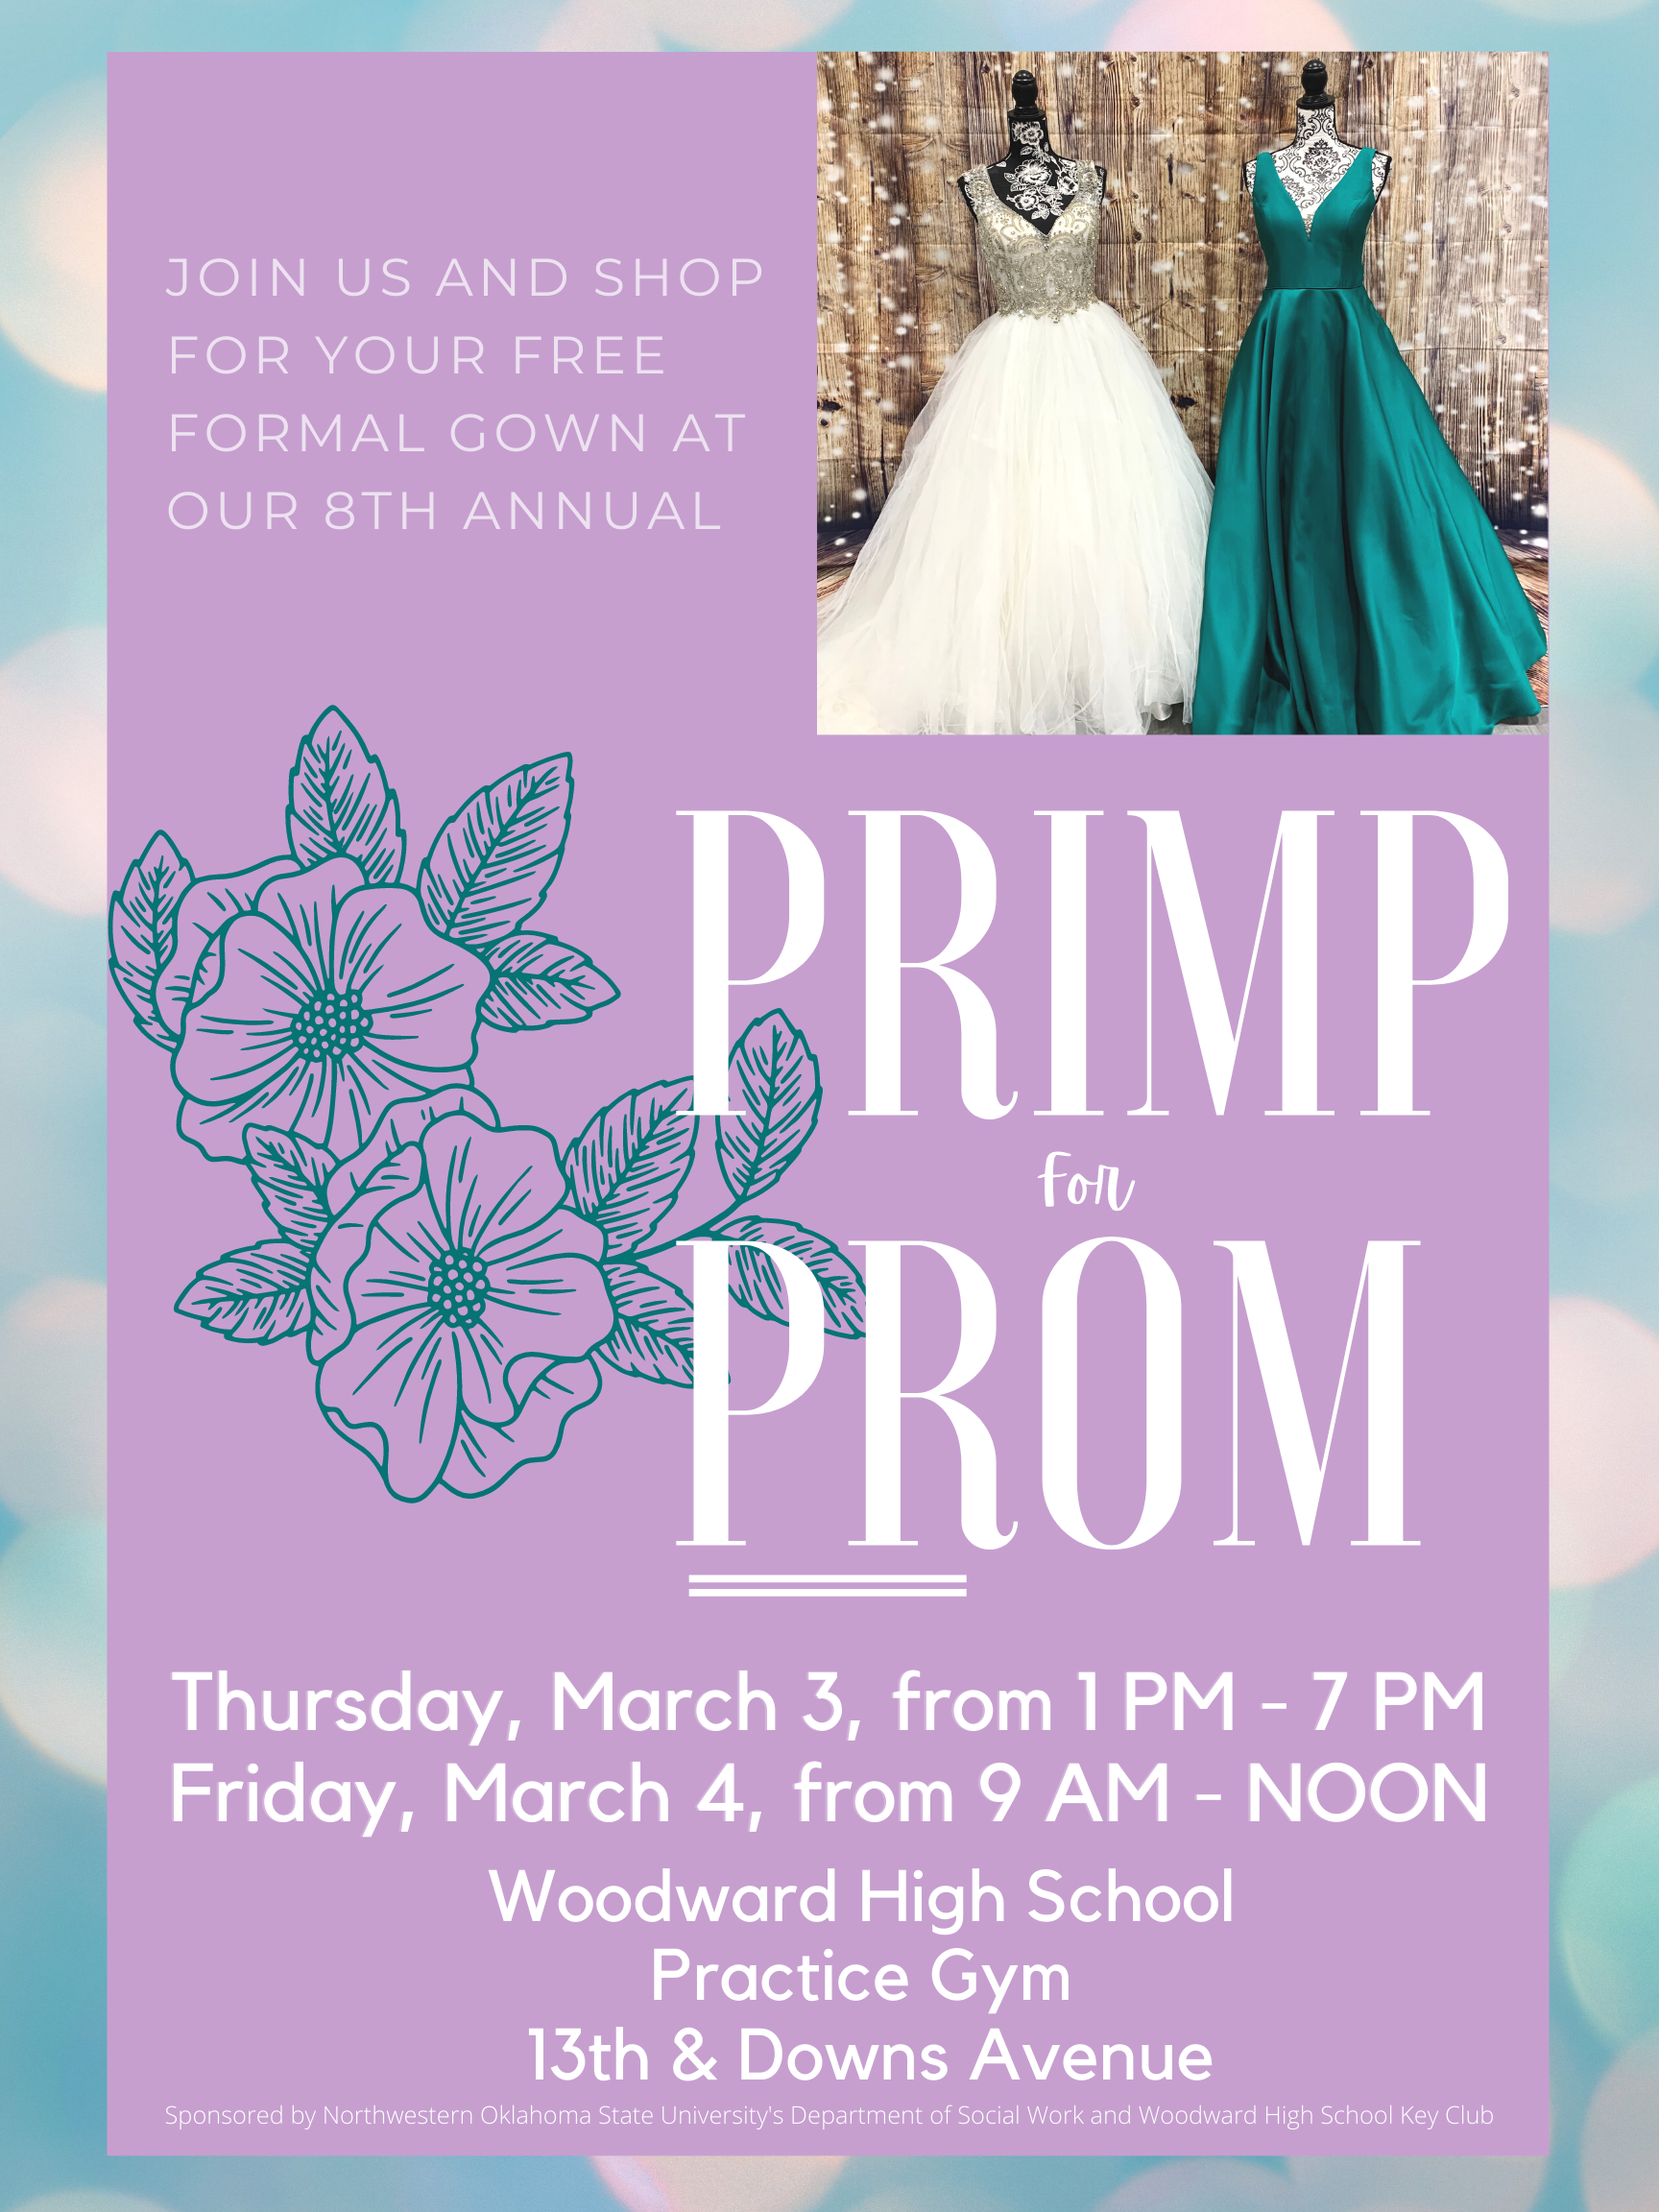 Primp for Prom 2022 Event Flyer